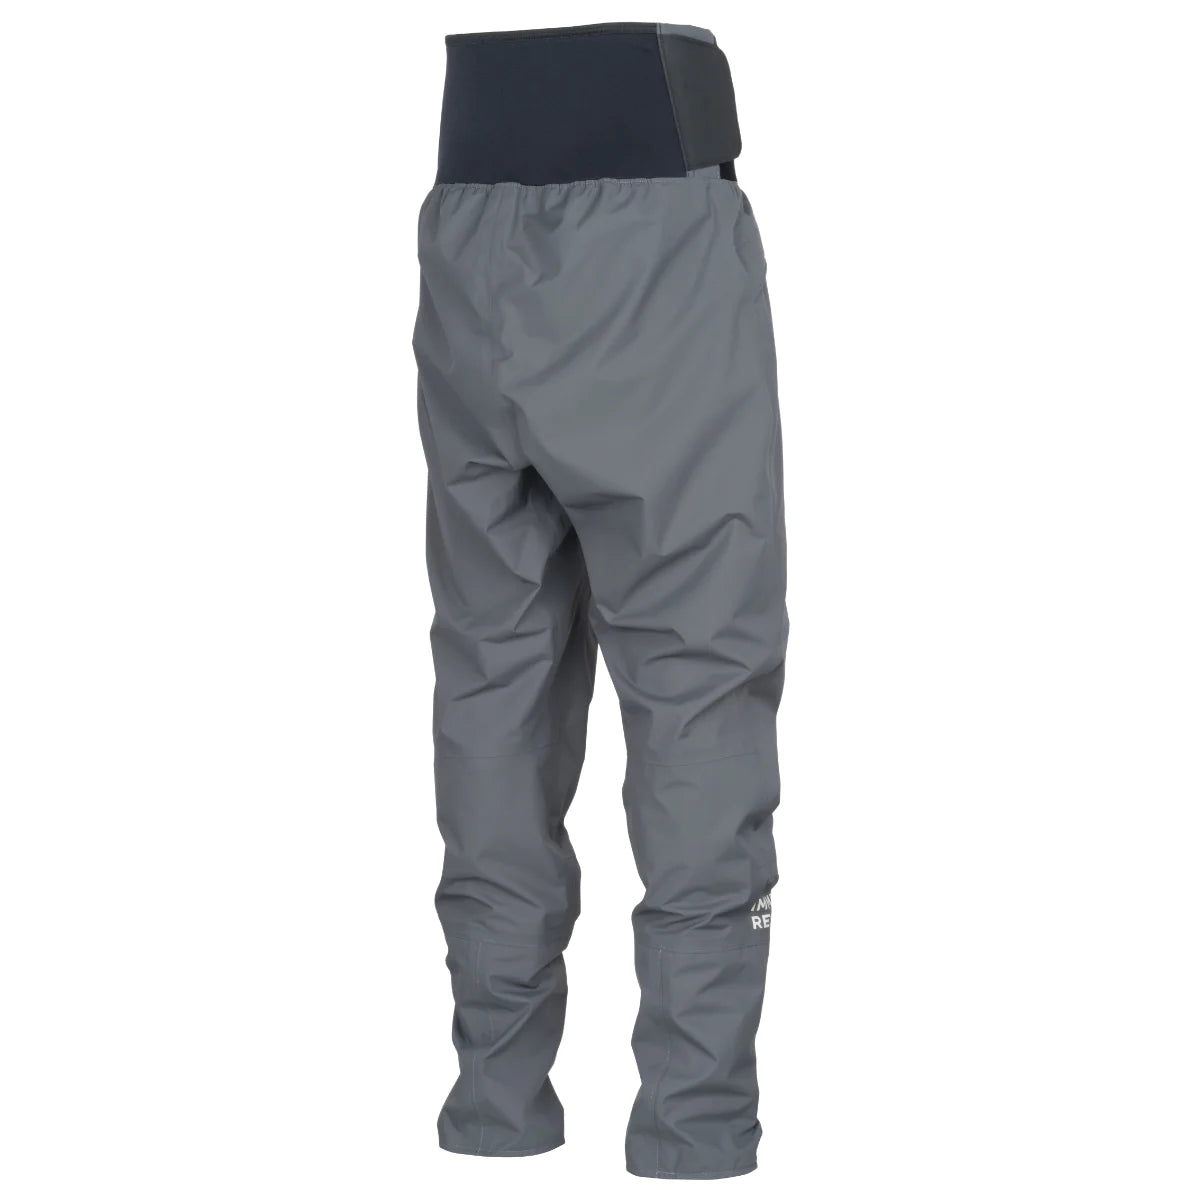 The back view of the Immersion Research Rival Paddling Pant offers protection and durability.